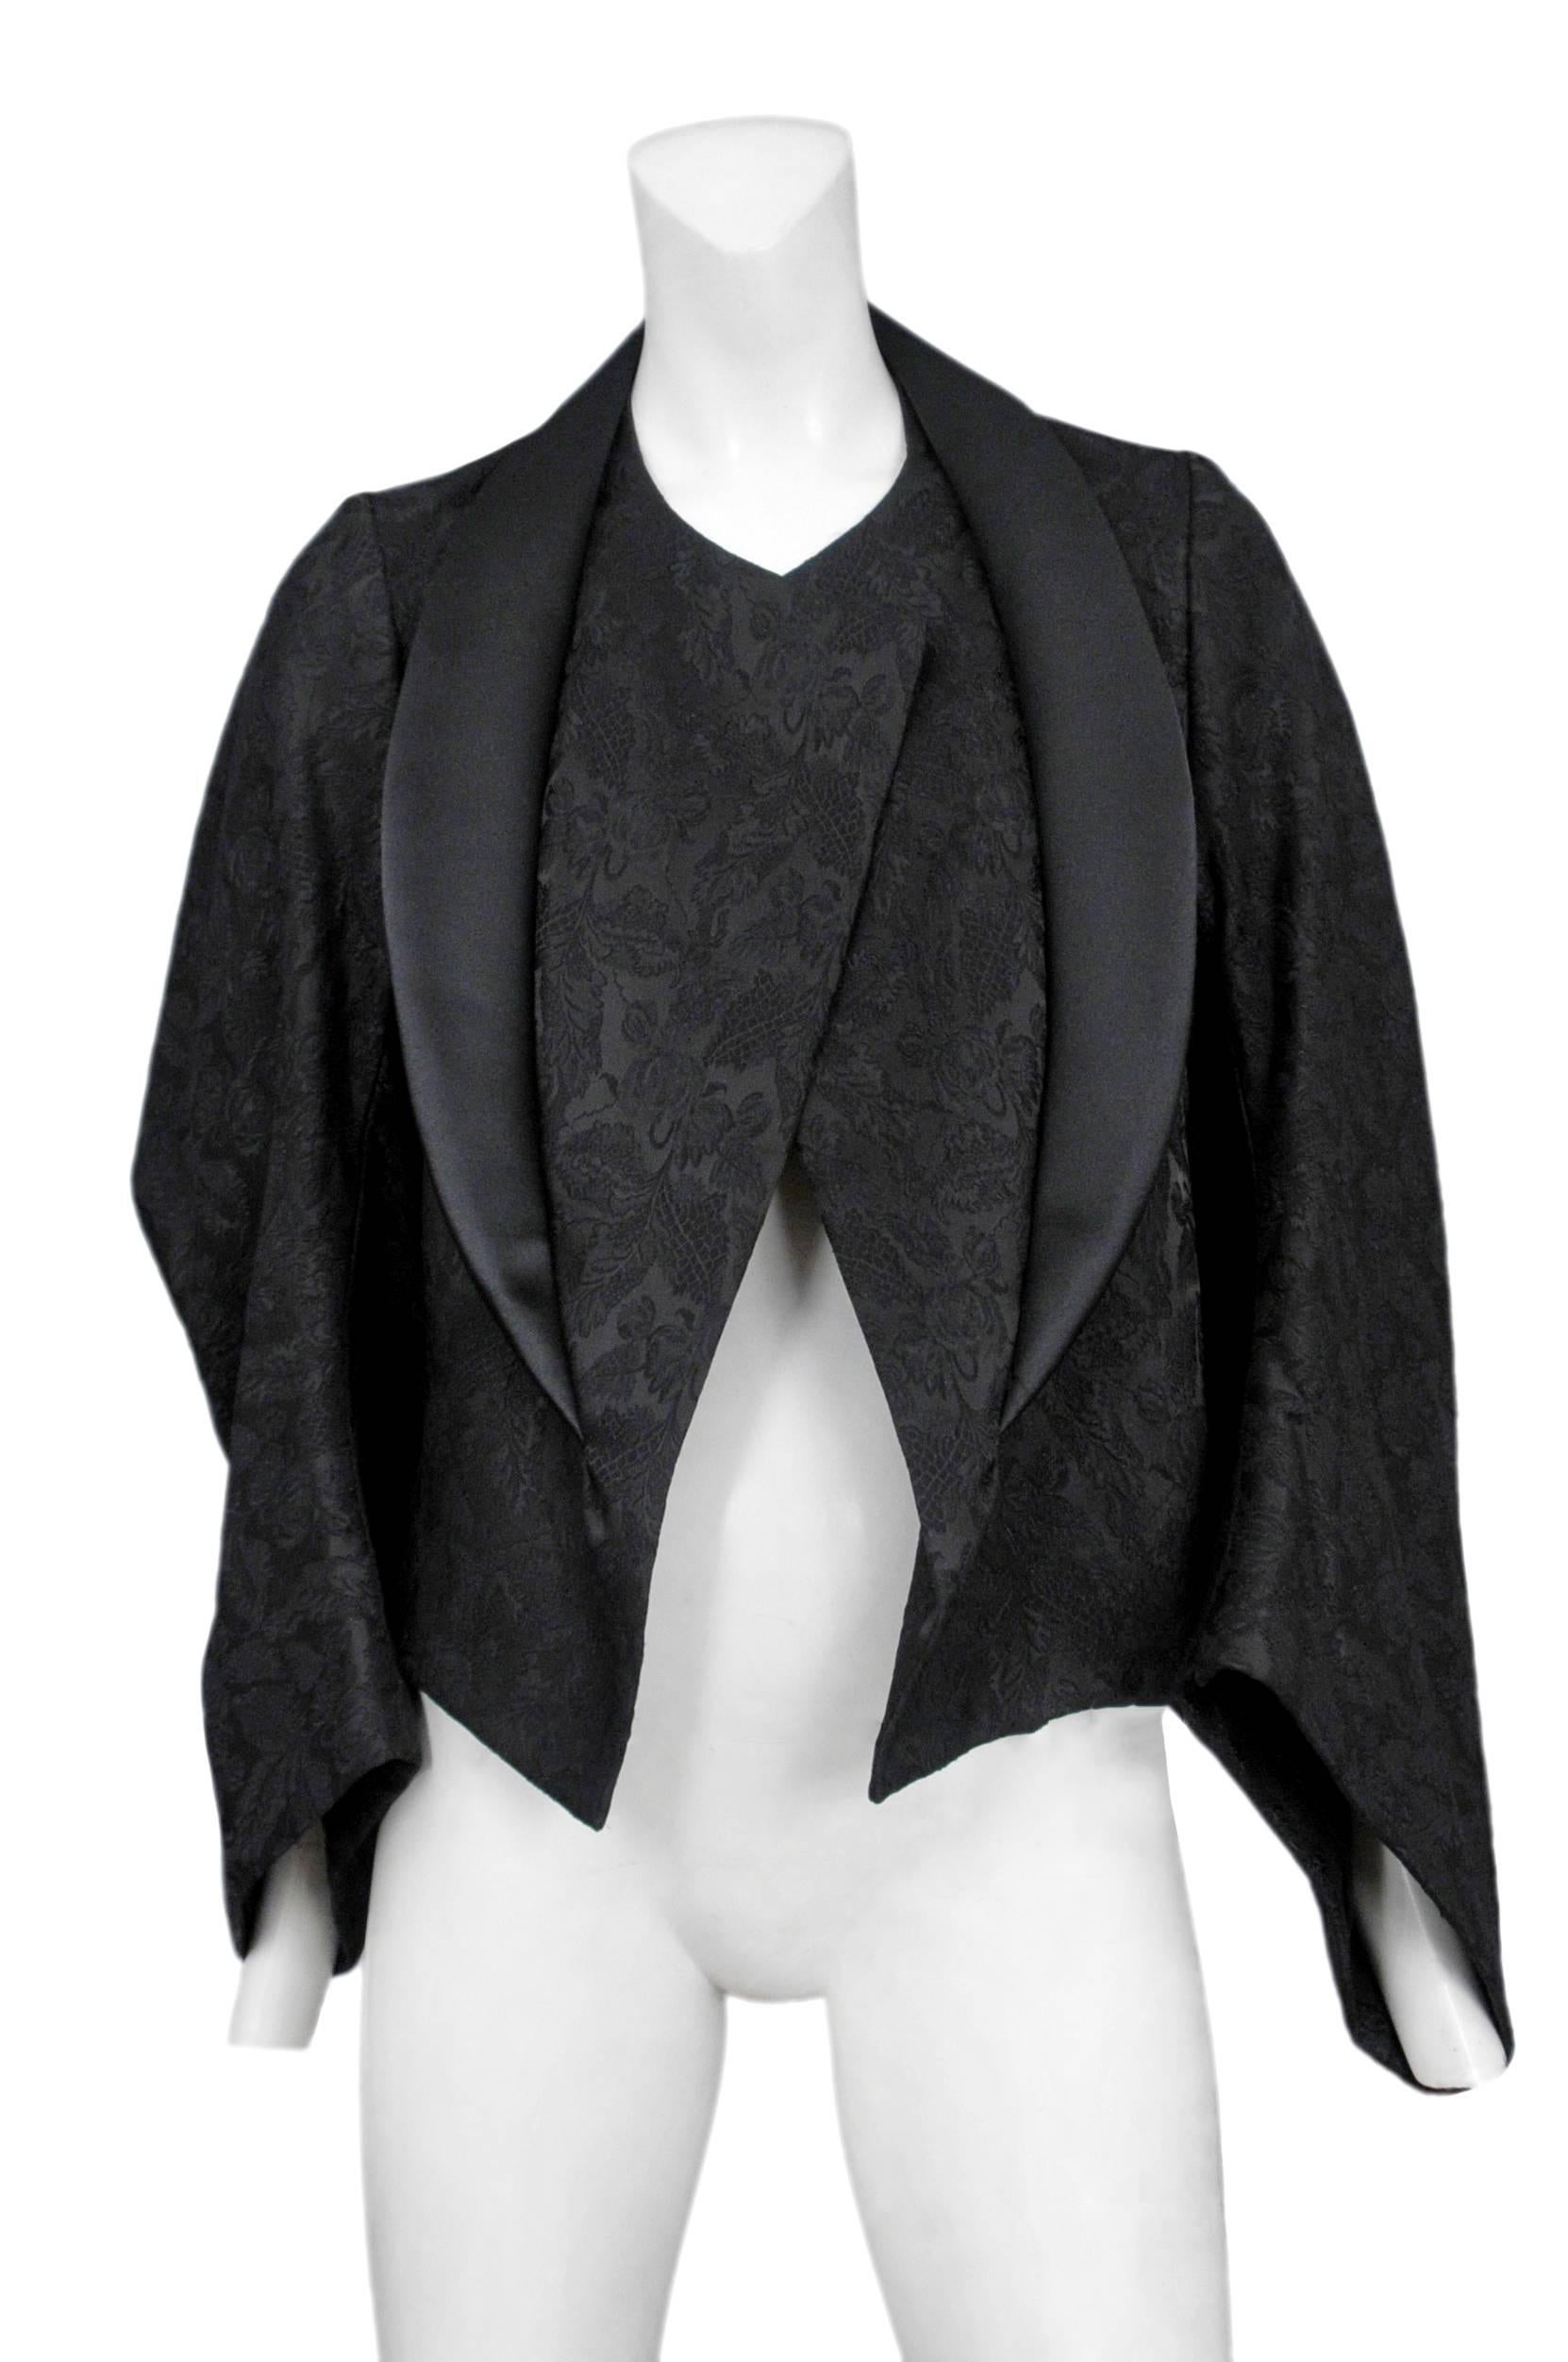 Vintage Comme des Garcons black on black brocade kimono sleeve jacket featuring a black satin collar and a voluminous side profile. Circa Autumn / Winter 2004.
Please inquire for additional images.